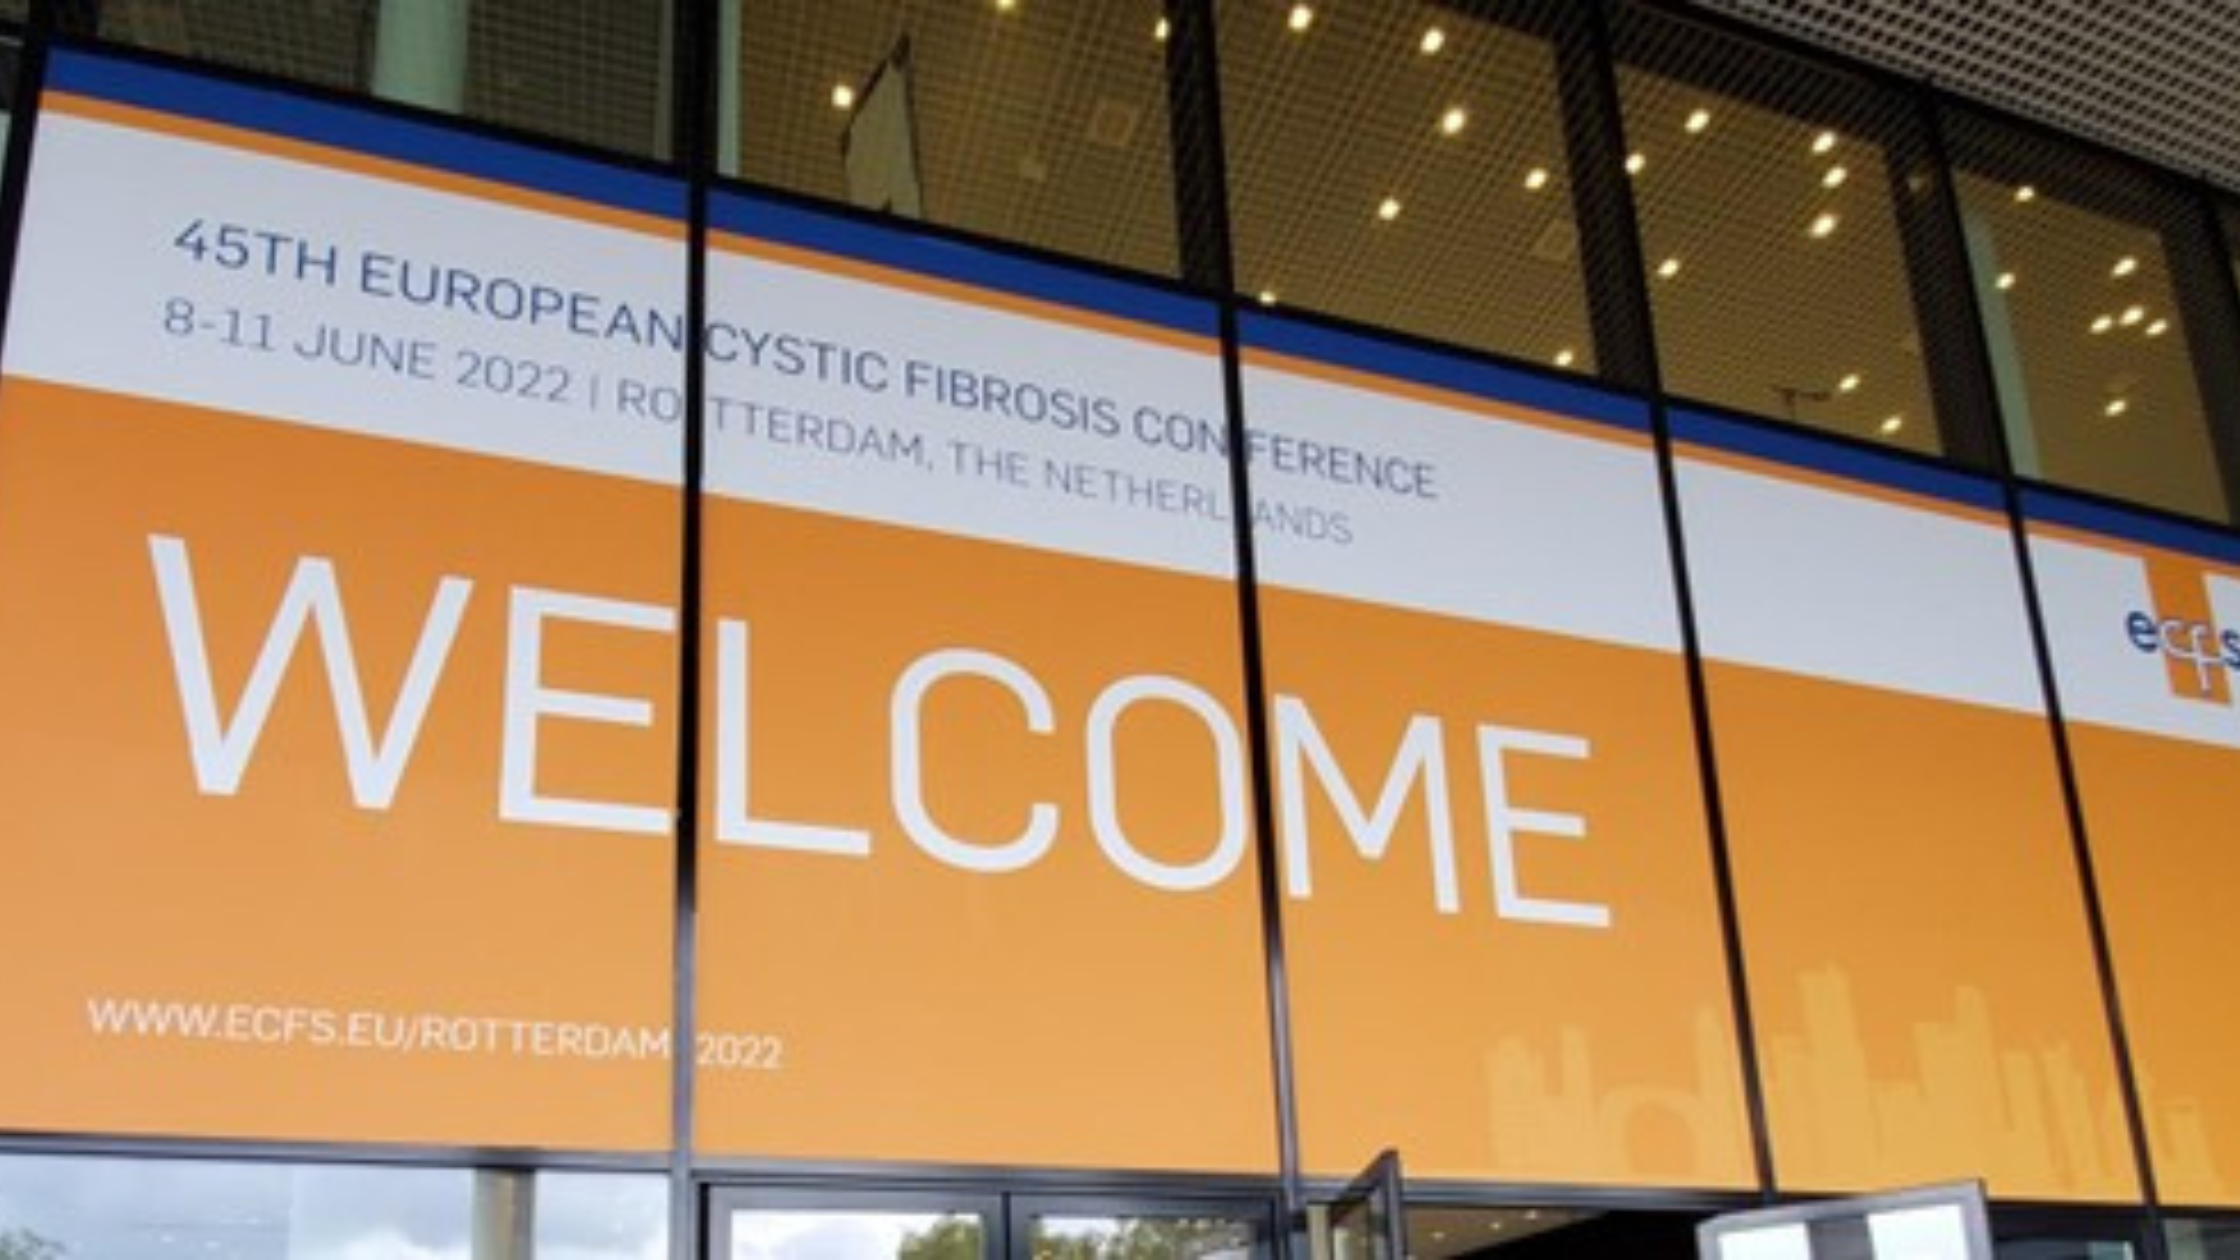 The 45th ECFS Conference Sign